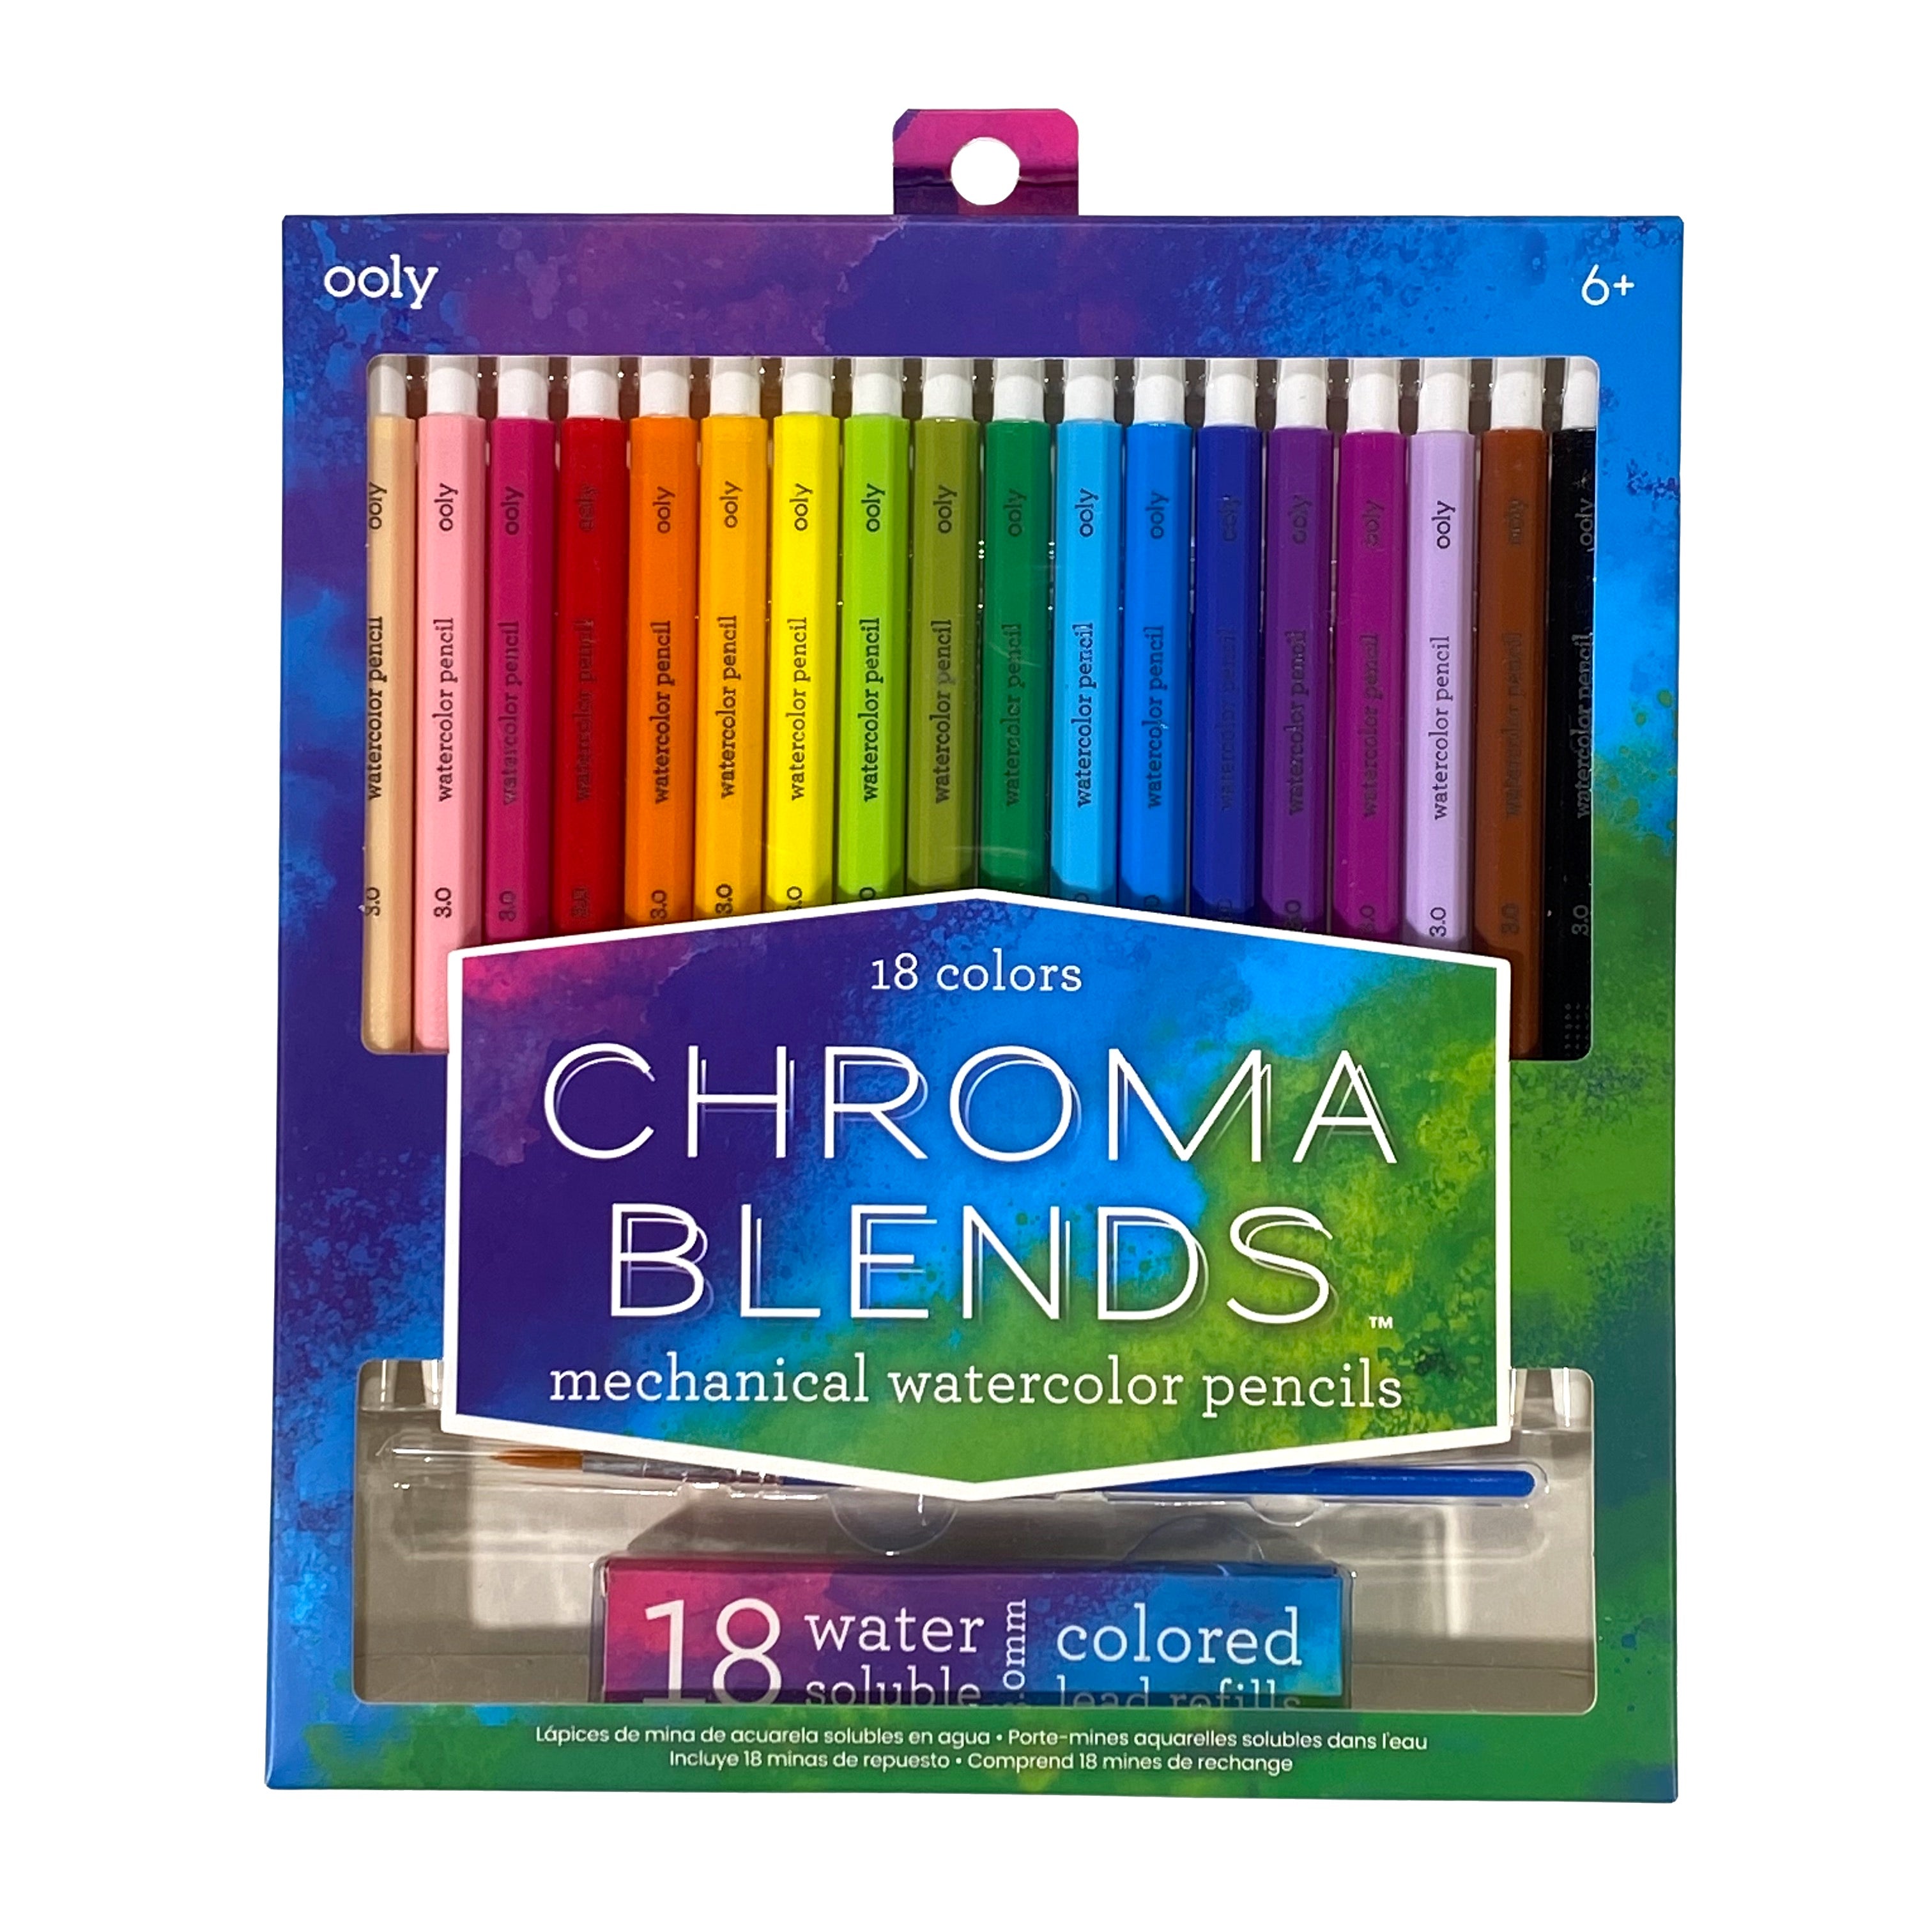 Ooly Chroma Blends Mechanical Watercolor Pencils (Set of 18)